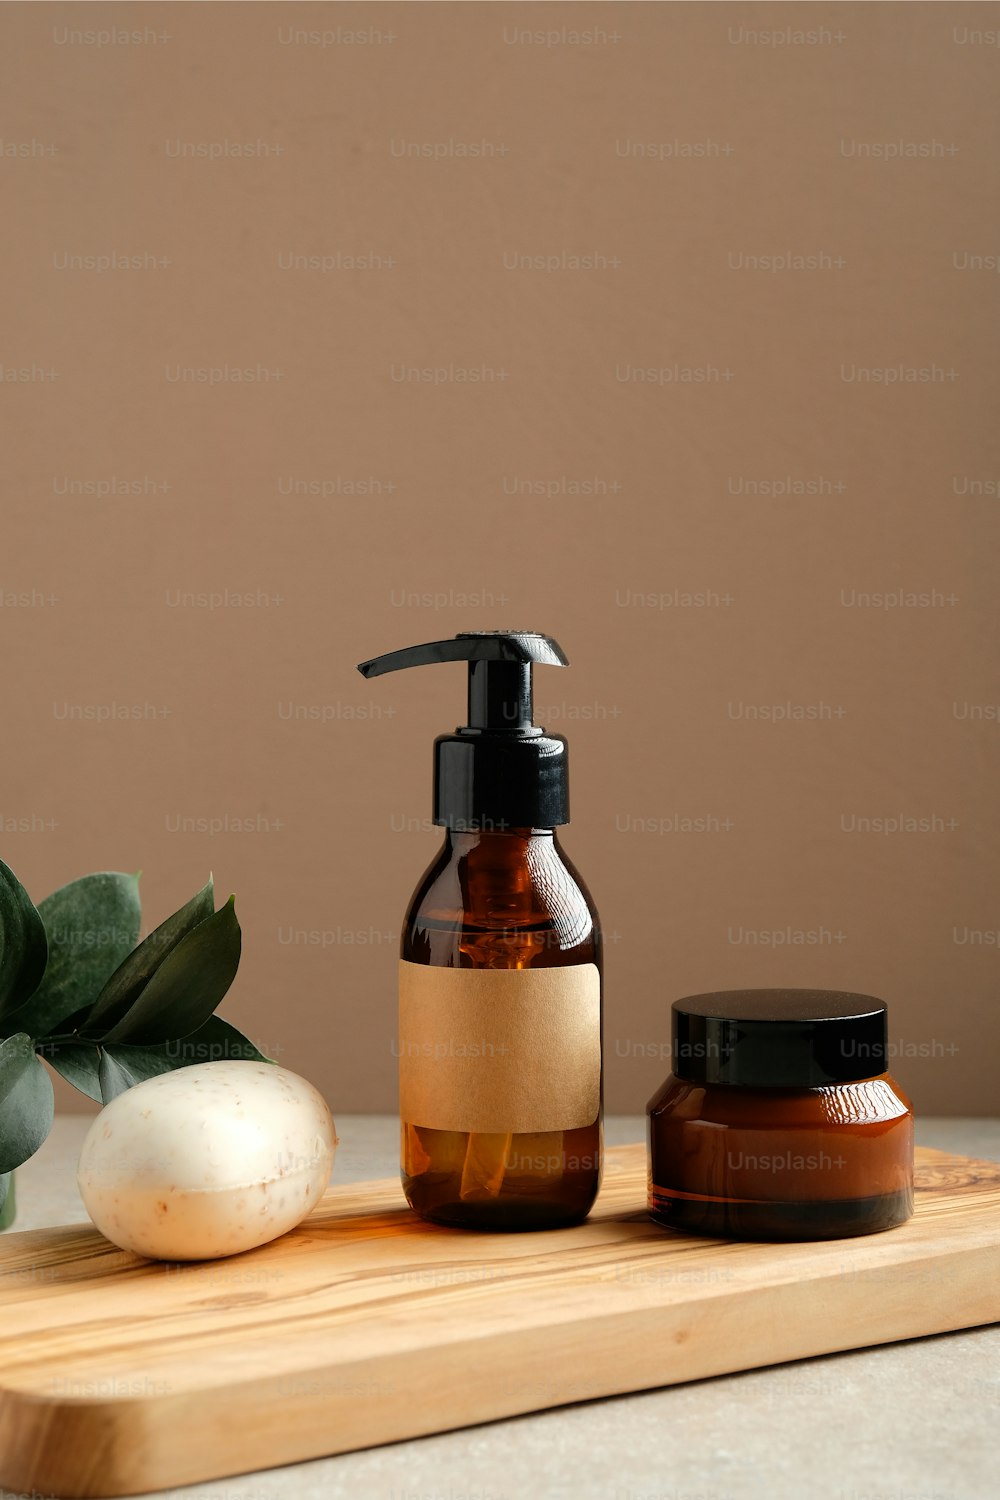 Organic natural cosmetic products with green leaves on wooden board. Amber glass dispenser bottle, body cream jar, homemade soap. Bathroom SPA beauty products packaging design.